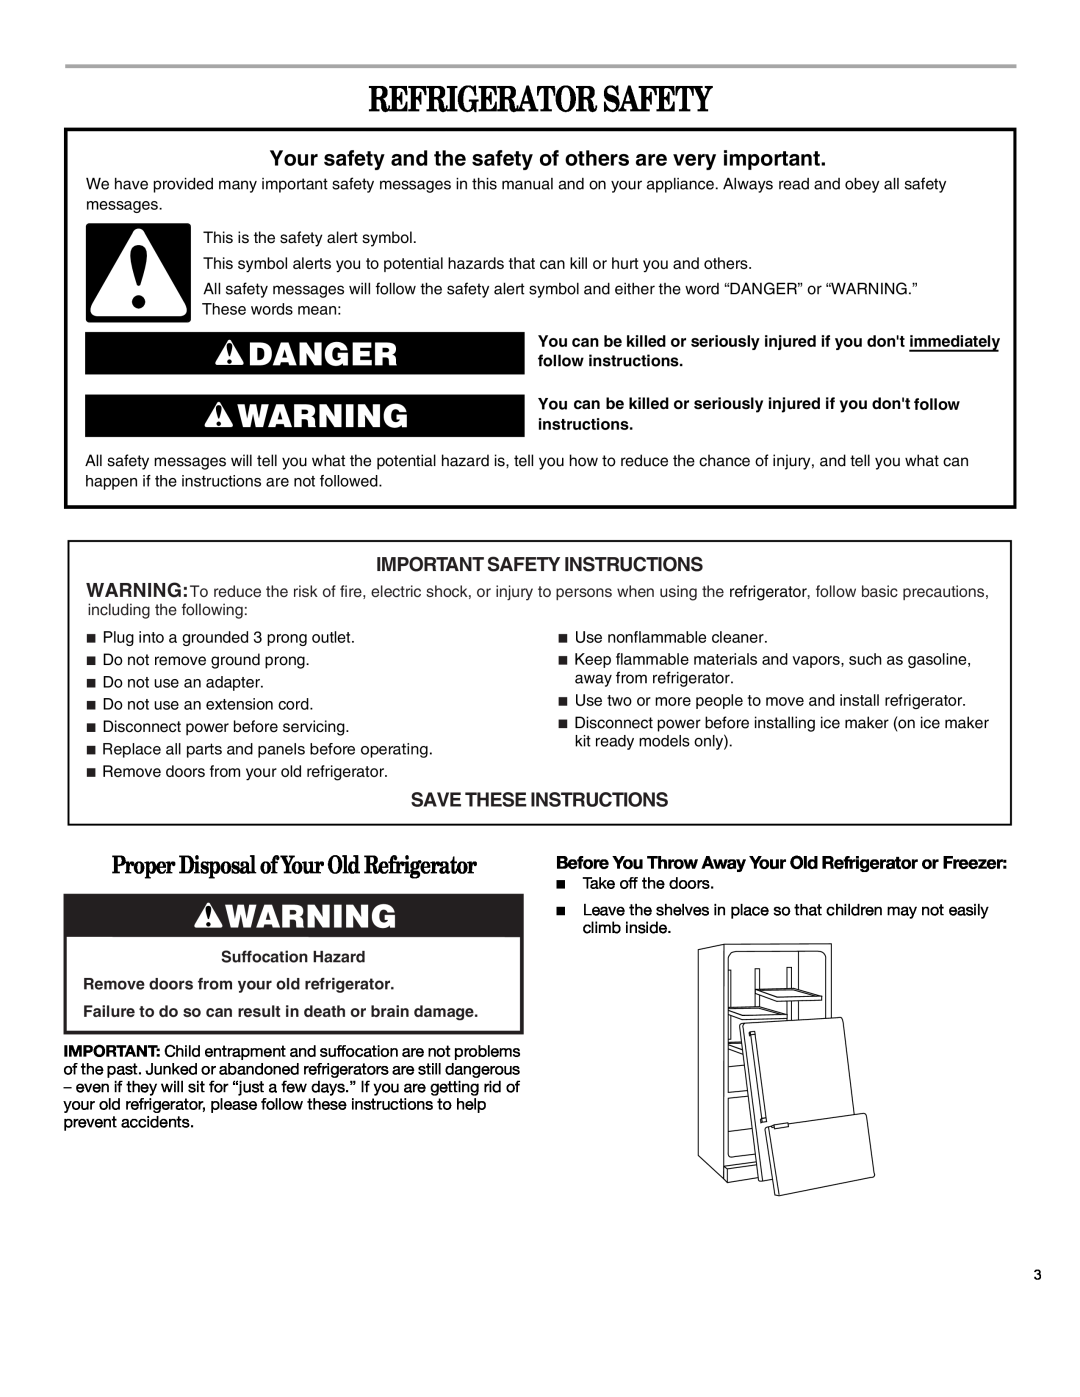 Whirlpool 12828125 Refrigerator Safety, Danger, Proper Disposal of Your Old Refrigerator, Important Safety Instructions 